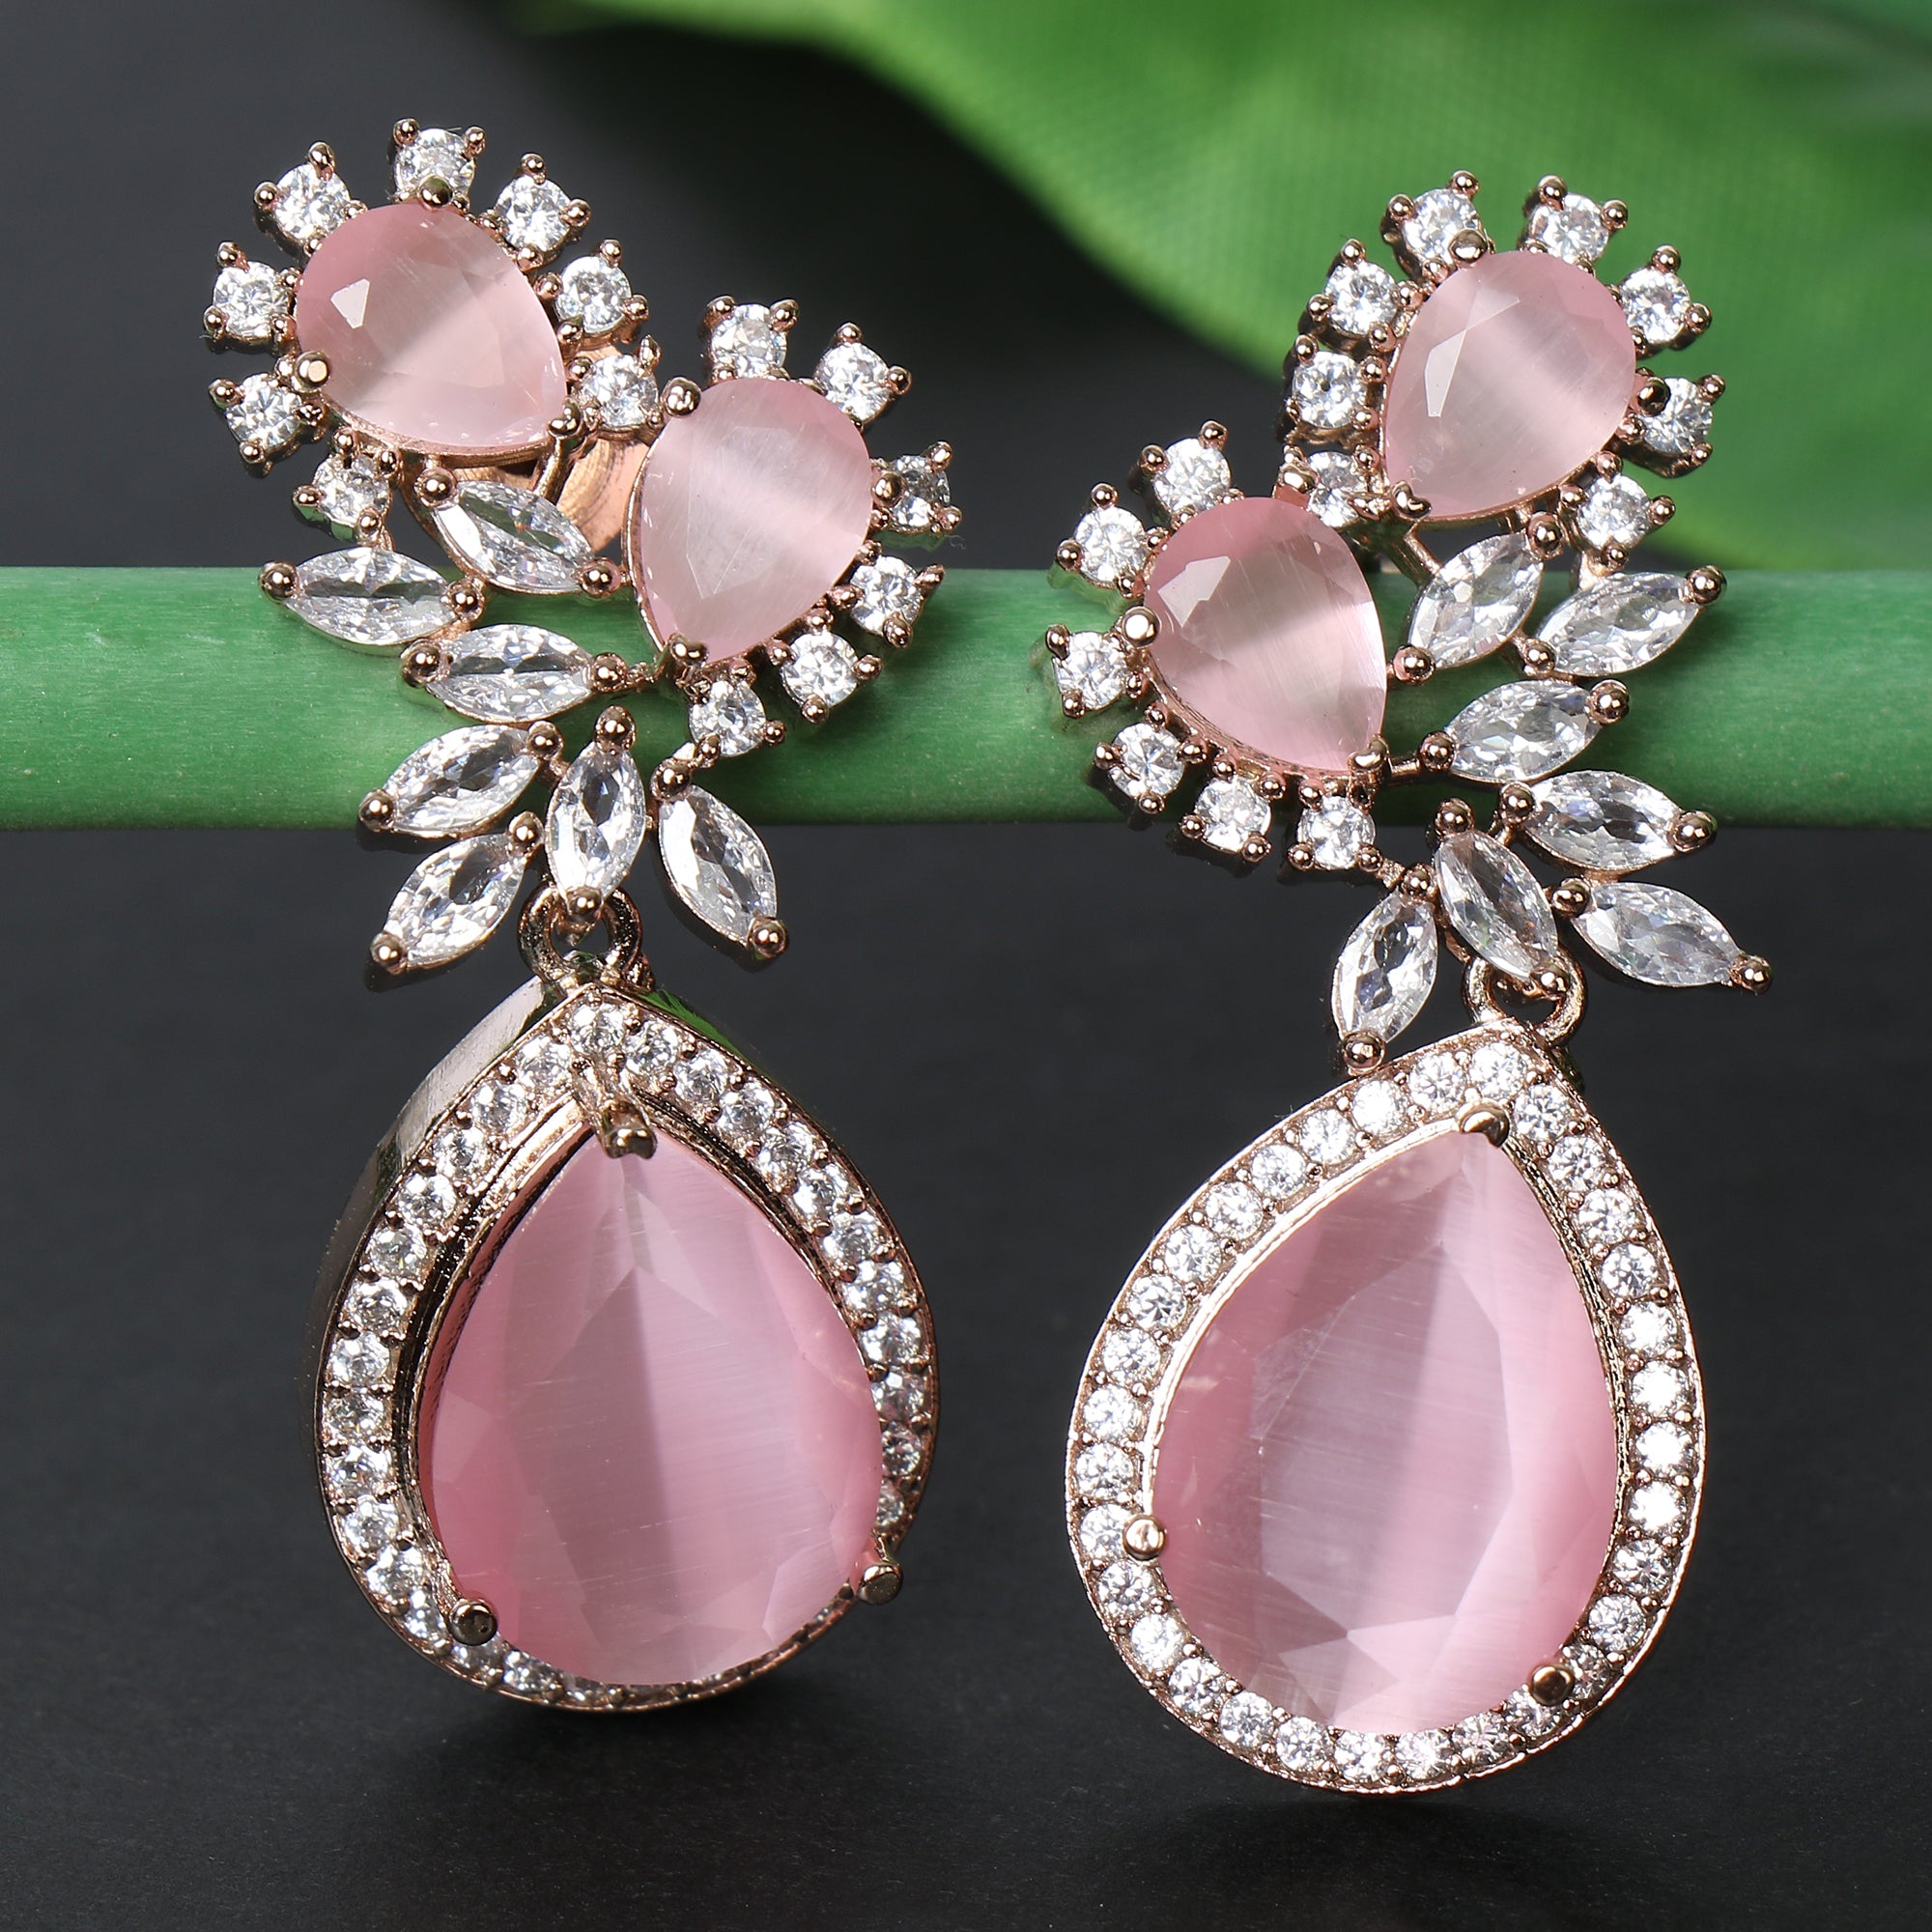 White Gold, Fancy Green Diamond, Pink Diamond And Diamond Drop Earrings  Available For Immediate Sale At Sotheby's